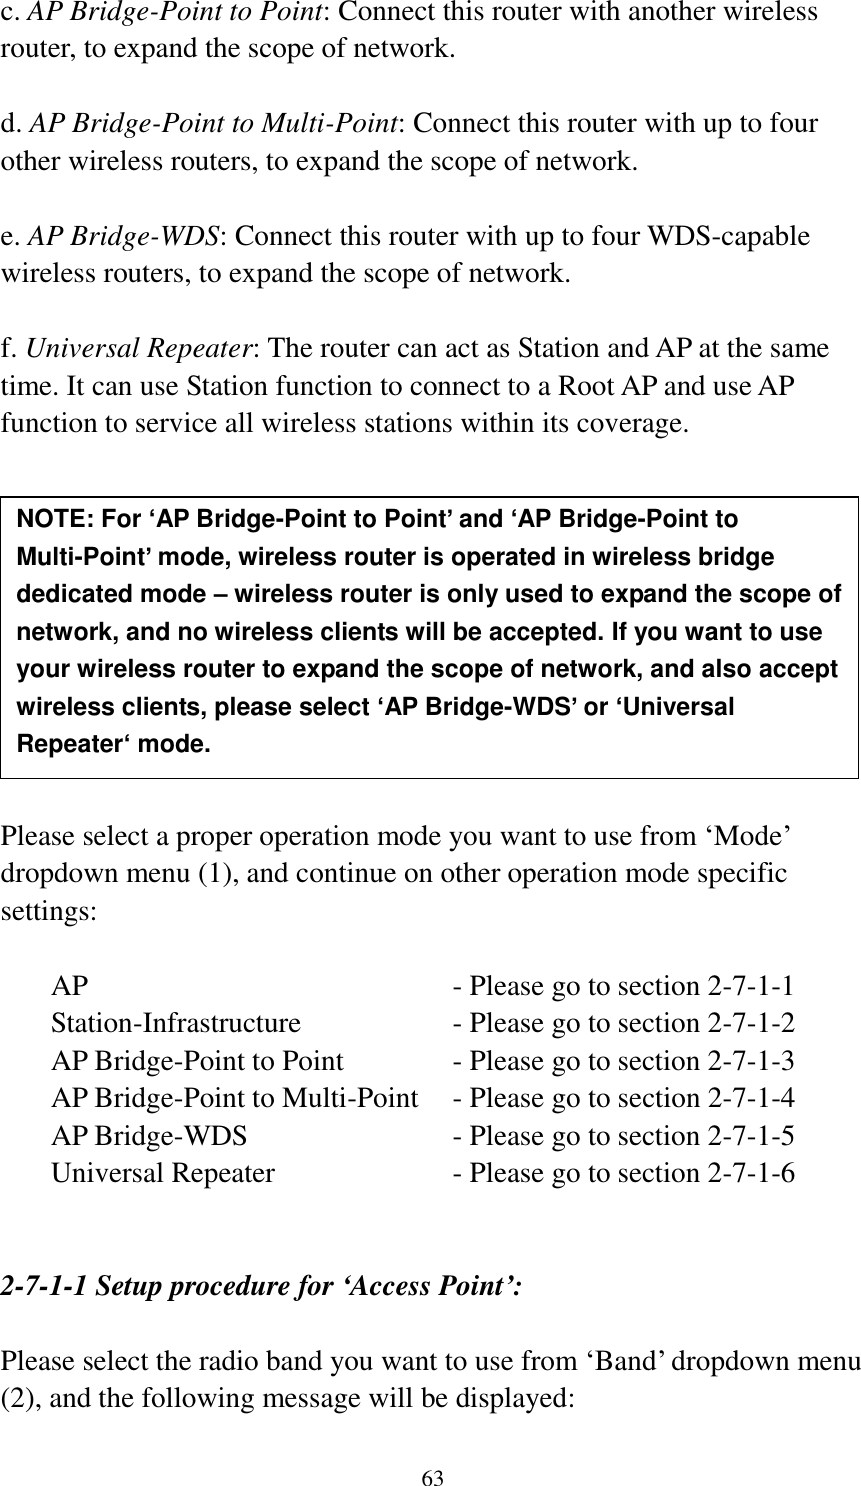 63 c. AP Bridge-Point to Point: Connect this router with another wireless router, to expand the scope of network.    d. AP Bridge-Point to Multi-Point: Connect this router with up to four other wireless routers, to expand the scope of network.  e. AP Bridge-WDS: Connect this router with up to four WDS-capable wireless routers, to expand the scope of network.  f. Universal Repeater: The router can act as Station and AP at the same time. It can use Station function to connect to a Root AP and use AP function to service all wireless stations within its coverage.           Please select a proper operation mode you want to use from ‘Mode’ dropdown menu (1), and continue on other operation mode specific settings:  AP                - Please go to section 2-7-1-1 Station-Infrastructure        - Please go to section 2-7-1-2 AP Bridge-Point to Point     - Please go to section 2-7-1-3 AP Bridge-Point to Multi-Point  - Please go to section 2-7-1-4 AP Bridge-WDS         - Please go to section 2-7-1-5 Universal Repeater          - Please go to section 2-7-1-6   2-7-1-1 Setup procedure for ‘Access Point’:  Please select the radio band you want to use from ‘Band’ dropdown menu (2), and the following message will be displayed: NOTE: For ‘AP Bridge-Point to Point’ and ‘AP Bridge-Point to Multi-Point’ mode, wireless router is operated in wireless bridge dedicated mode – wireless router is only used to expand the scope of network, and no wireless clients will be accepted. If you want to use your wireless router to expand the scope of network, and also accept wireless clients, please select ‘AP Bridge-WDS’ or ‘Universal Repeater‘ mode. 